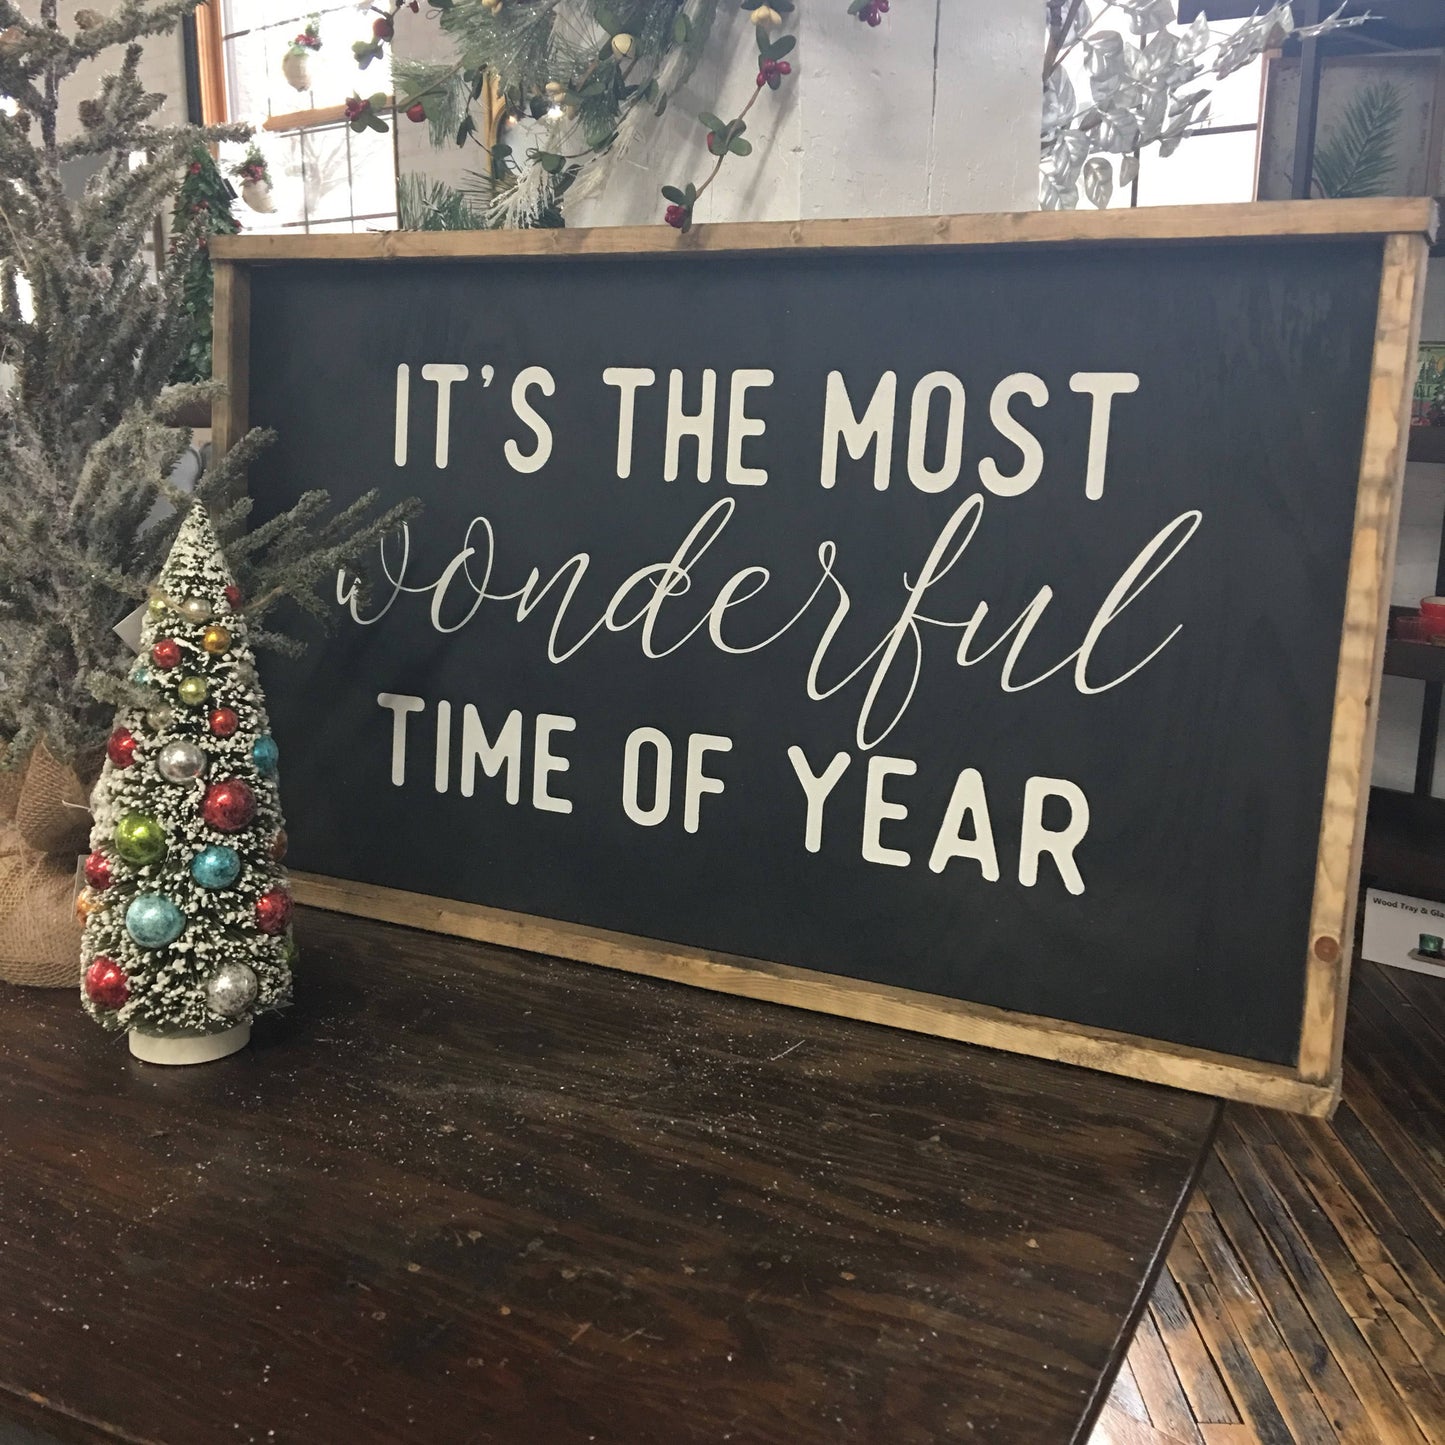 the most wonderful time [FREE SHIPPING!]